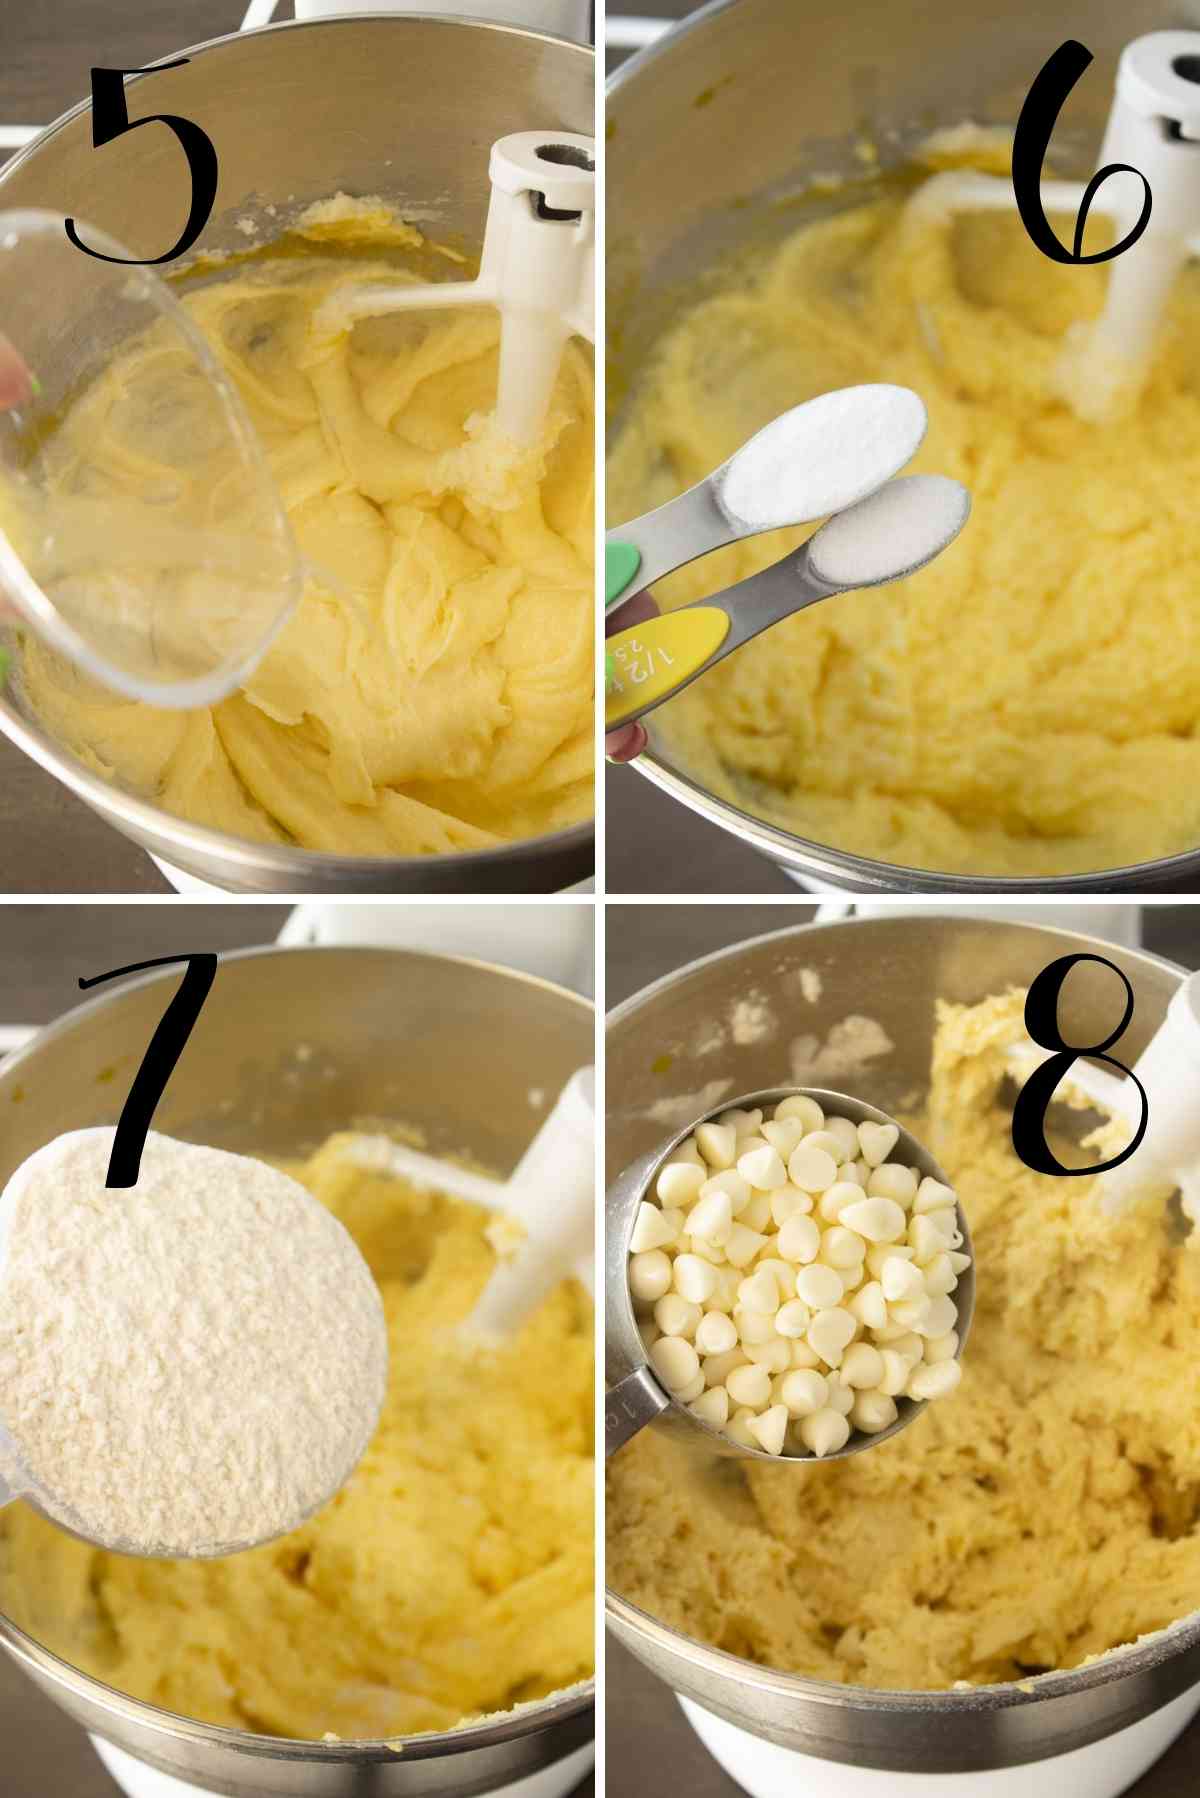 Add the lemon juice before the dry ingredients and white chocolate chips!